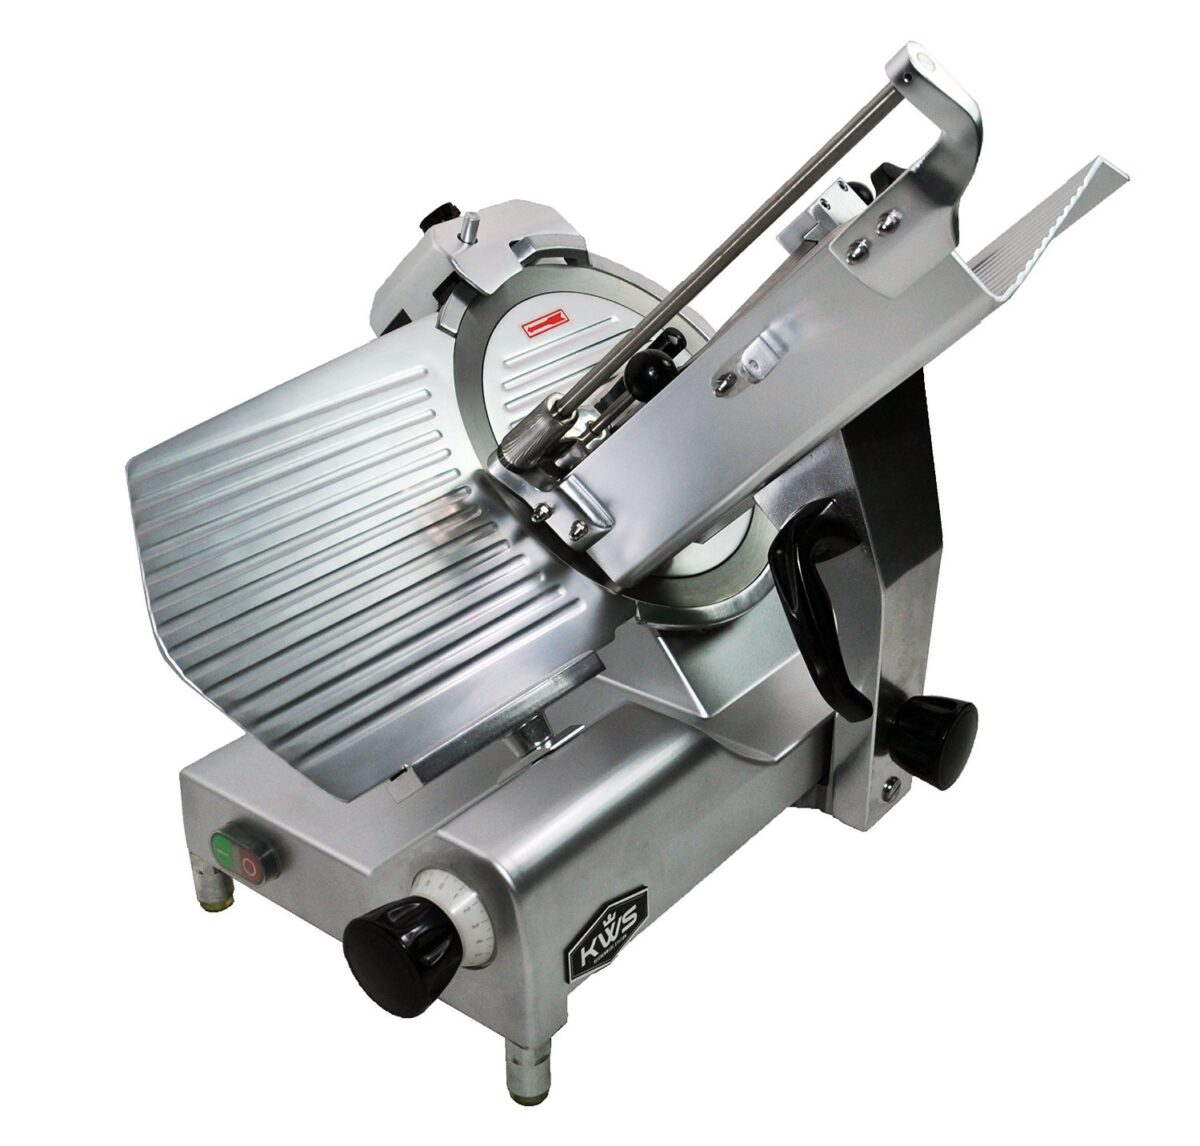 https://www.kitchenwarestation.com/wp-content/uploads/2016/07/MS-12HP-12%E2%80%B3-Deluxe-450W-Meat-Slicer-with-Stainless-Steel-Blade-4-1200x1146.jpg